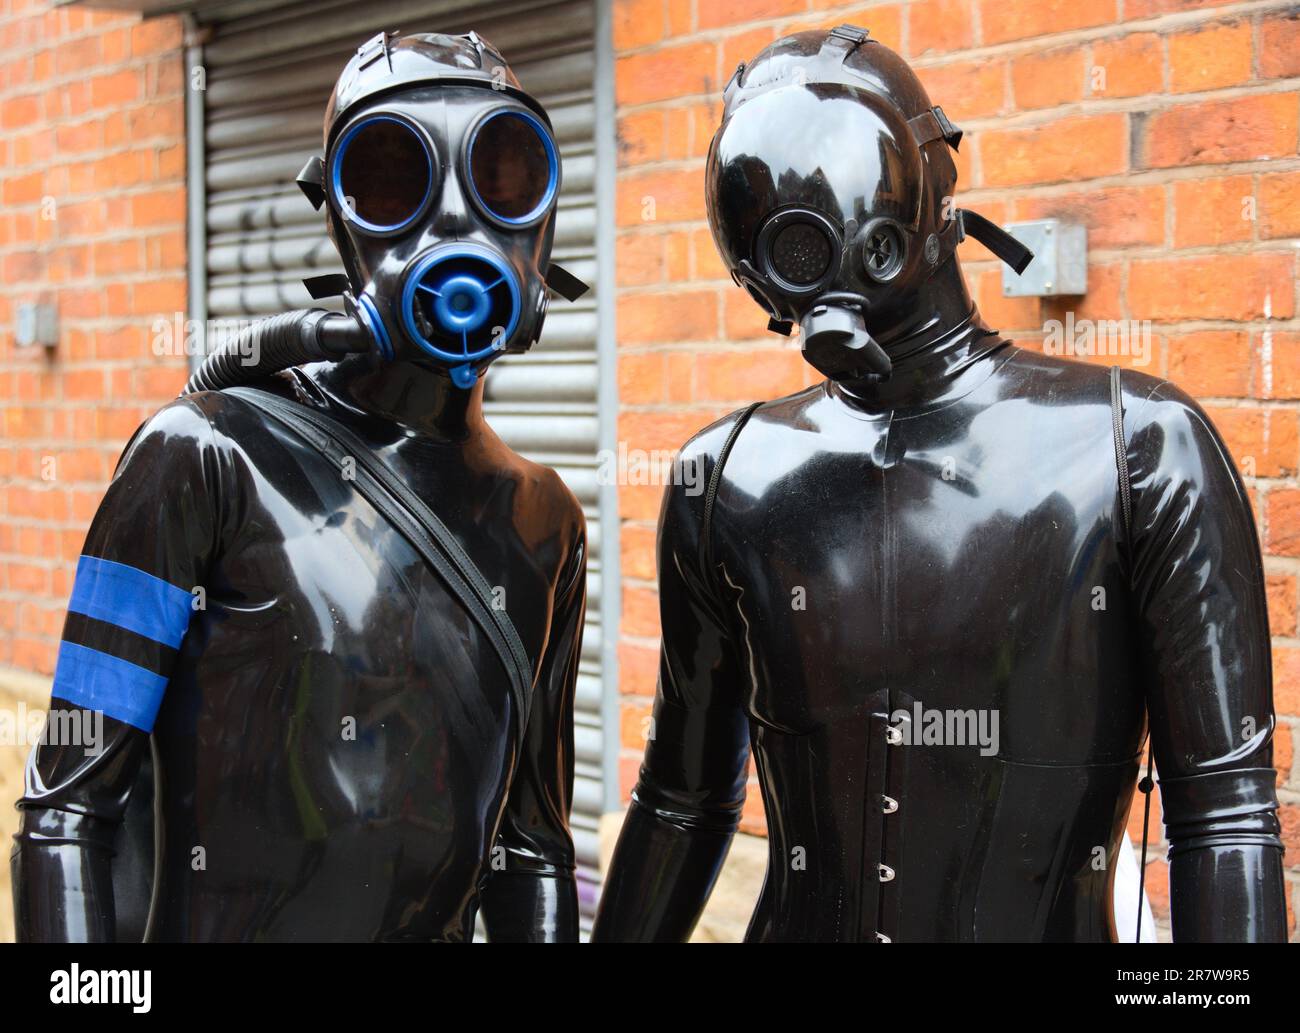 Manchester, UK, 17th June, 2023. People dressed in similar latex costumes, some wearing simulated gas masks, get ready for a walk in central Manchester as latex doppelgangers or clones. From 15th to 19th June, 2023, the 11th annual Manchester Rubber Weekend takes place in Manchester.  Credit: Terry Waller/Alamy Live News Stock Photo